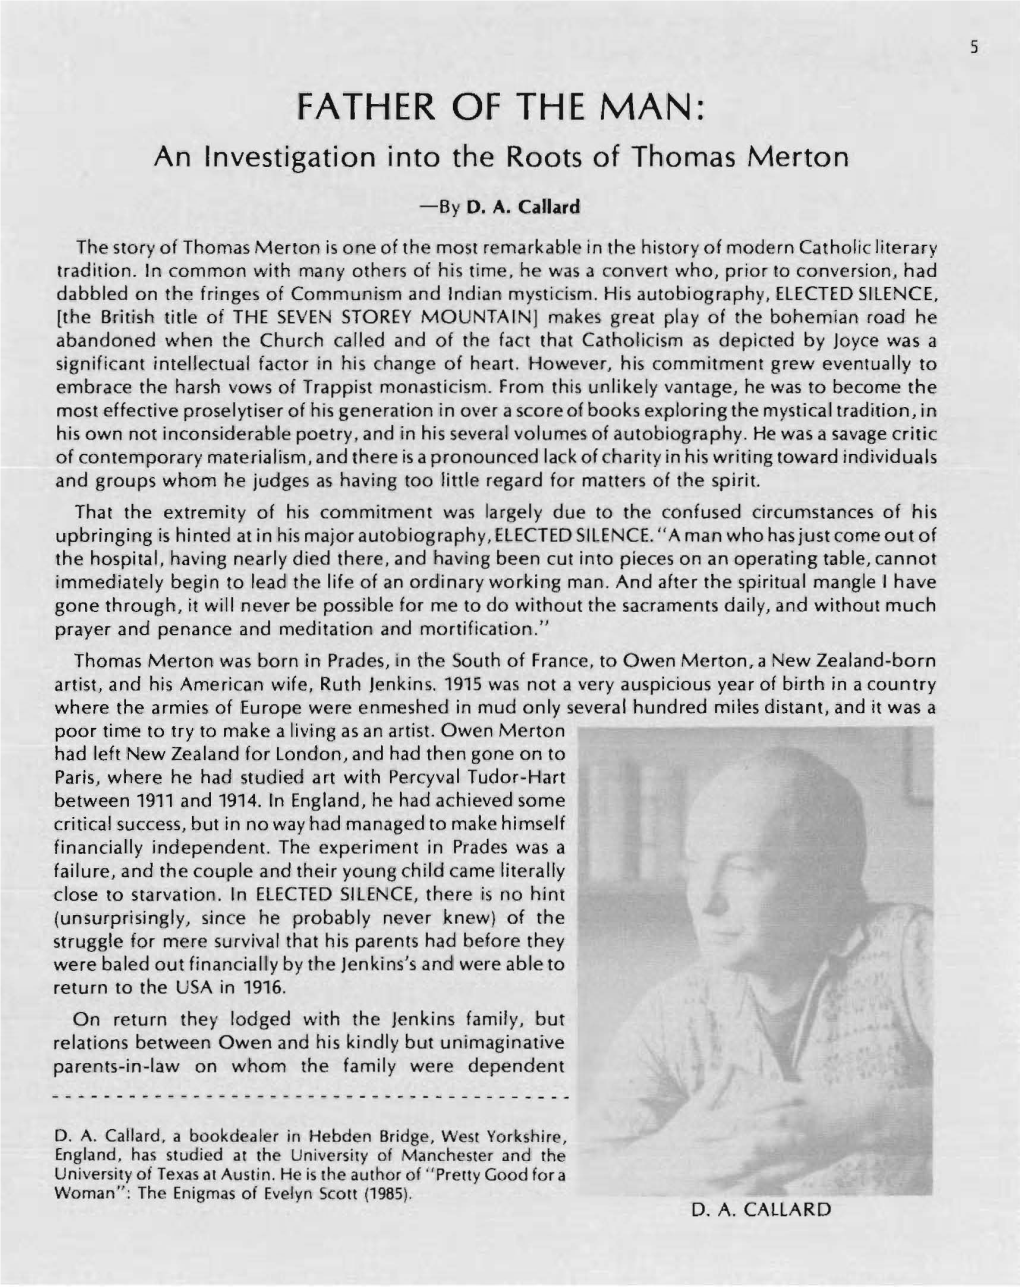 FATHER of the MAN: an Investigation Into the Roots of Thomas Merton